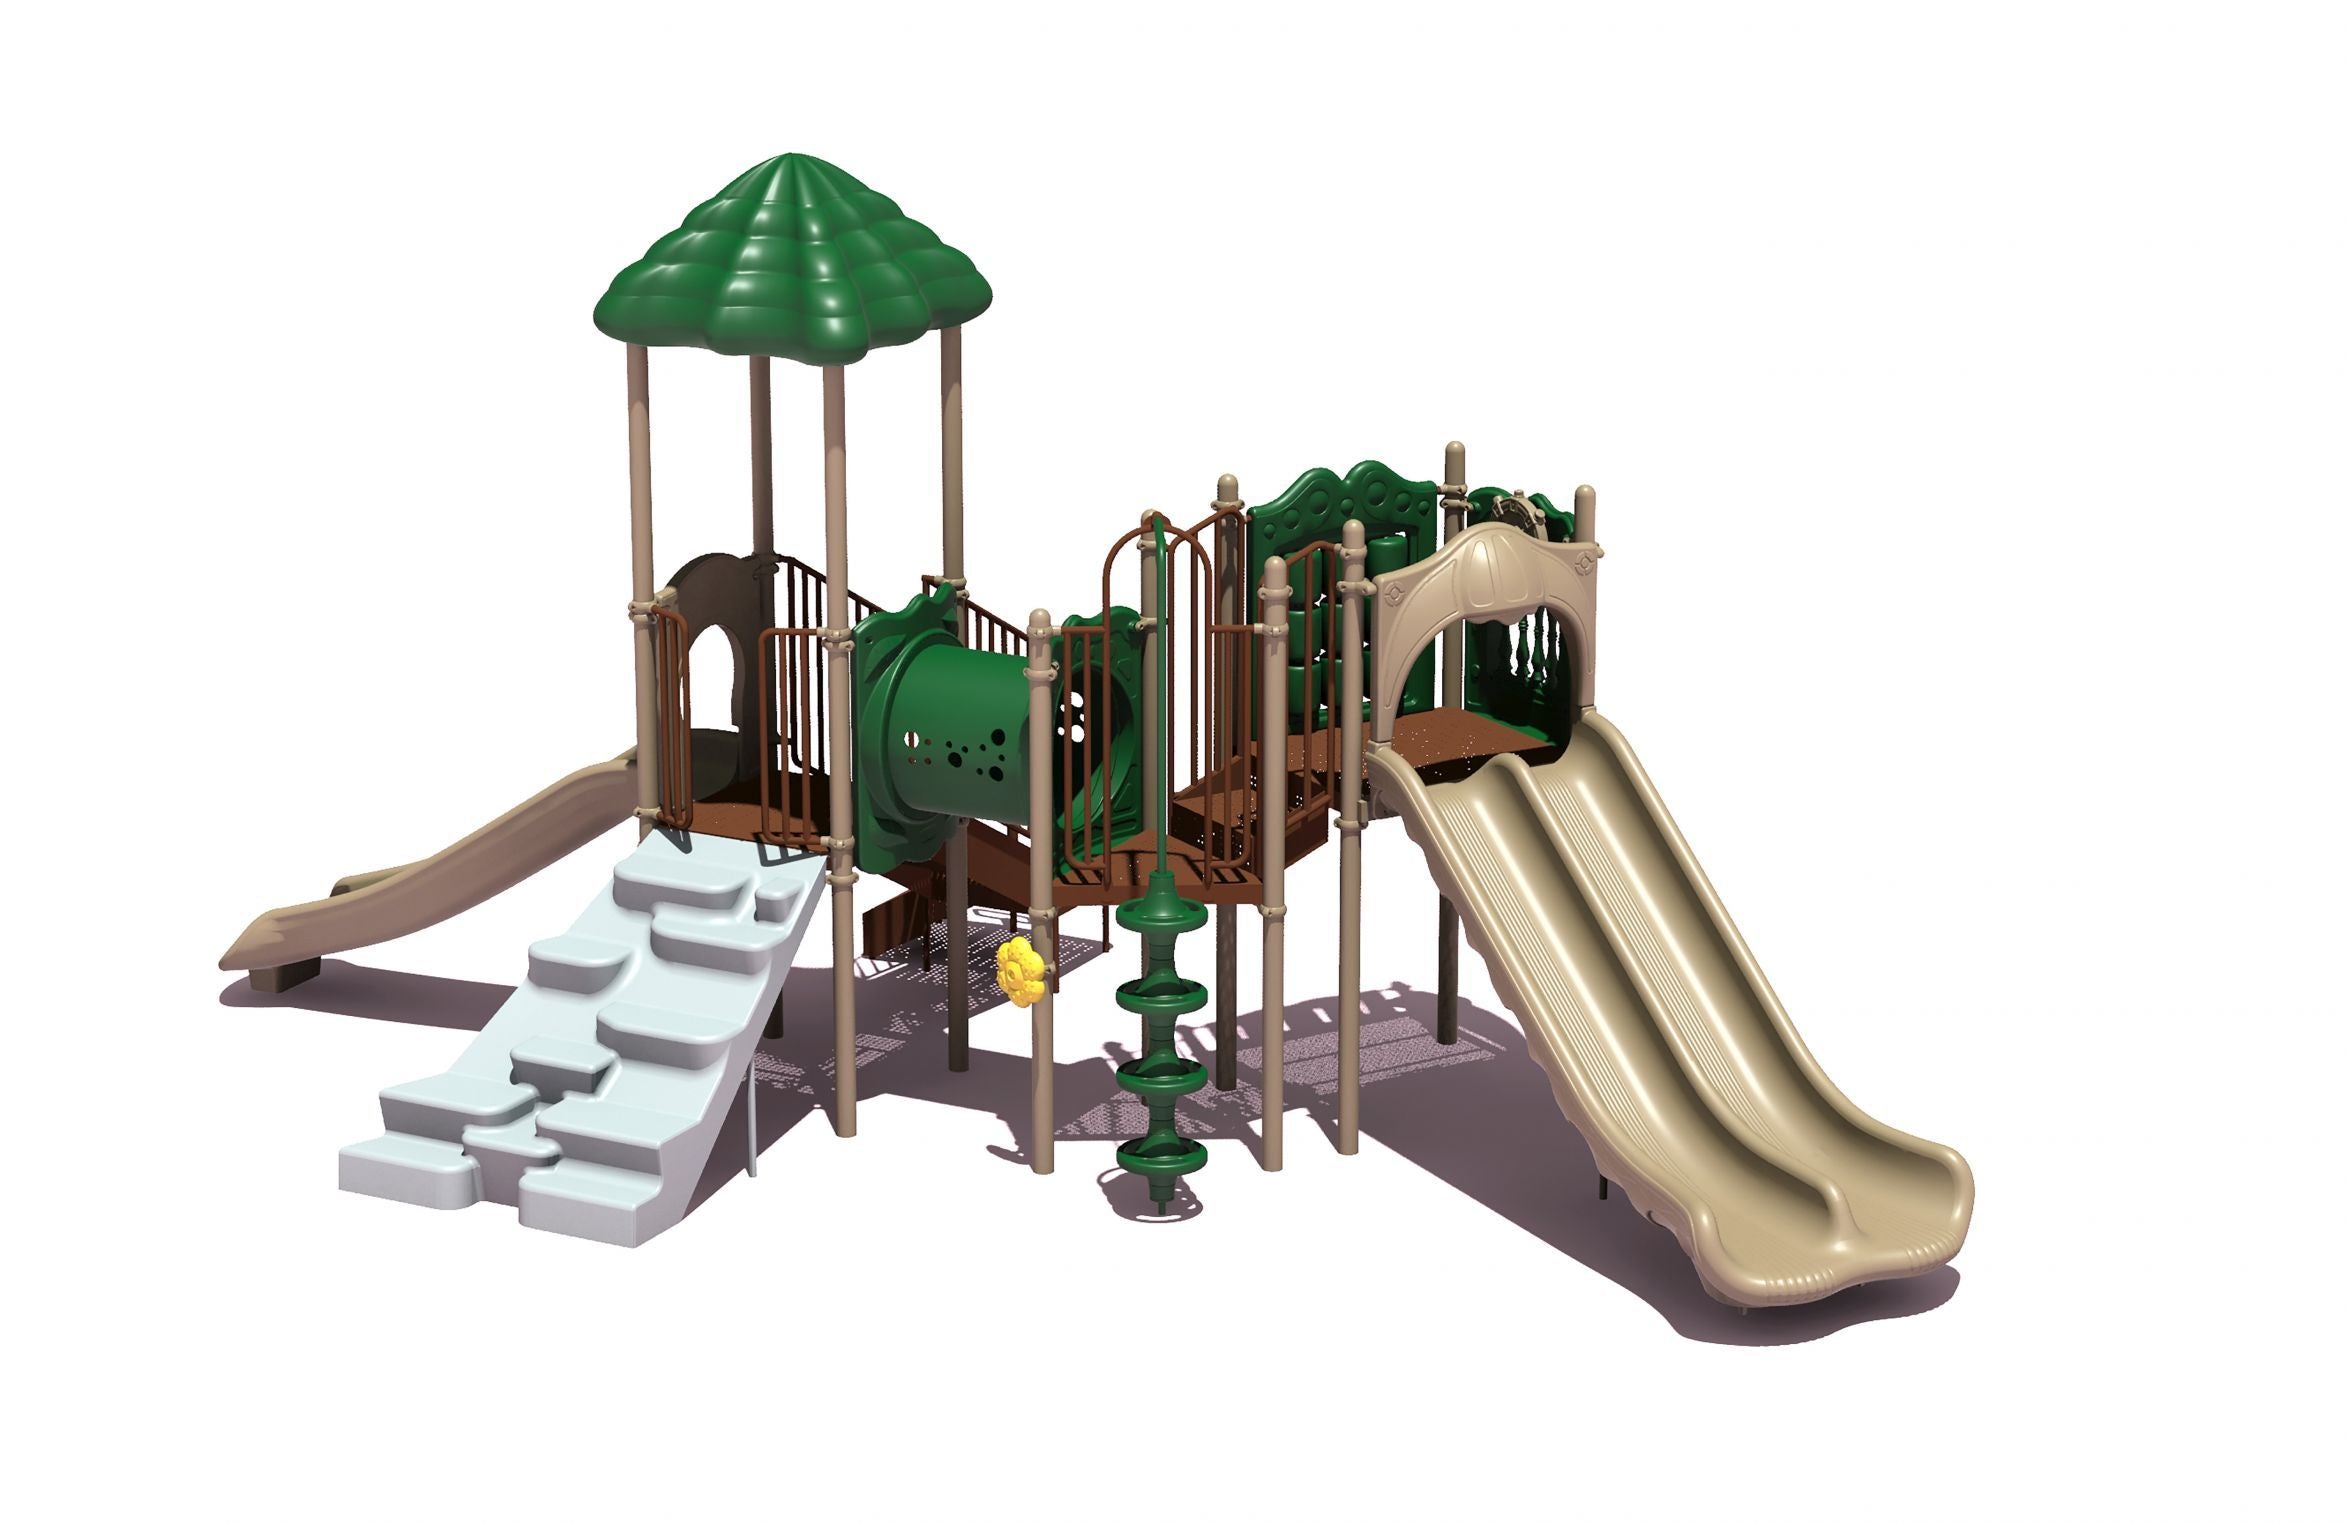 Falcons Roost Playsystem | WillyGoat Playground & Park Equipment